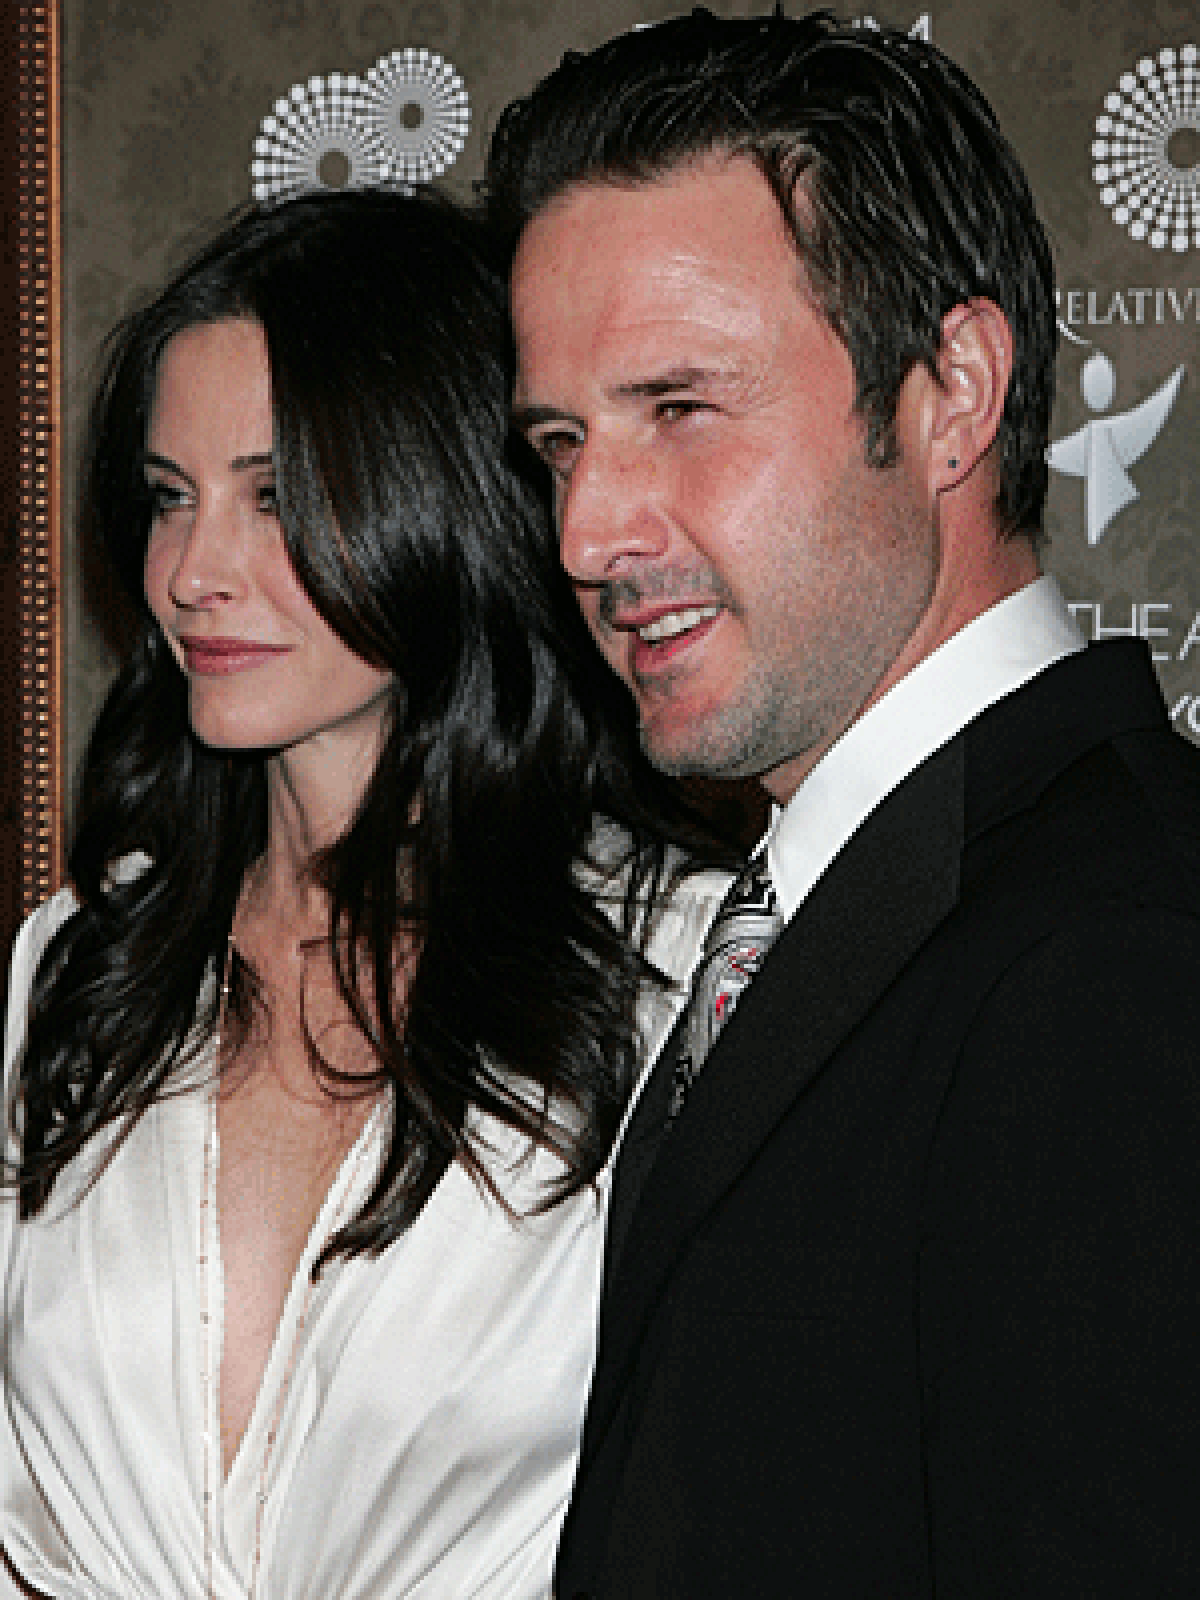 Courtney Cox and David Arquette are pictured at Elysium's 2nd annual black tie gala.